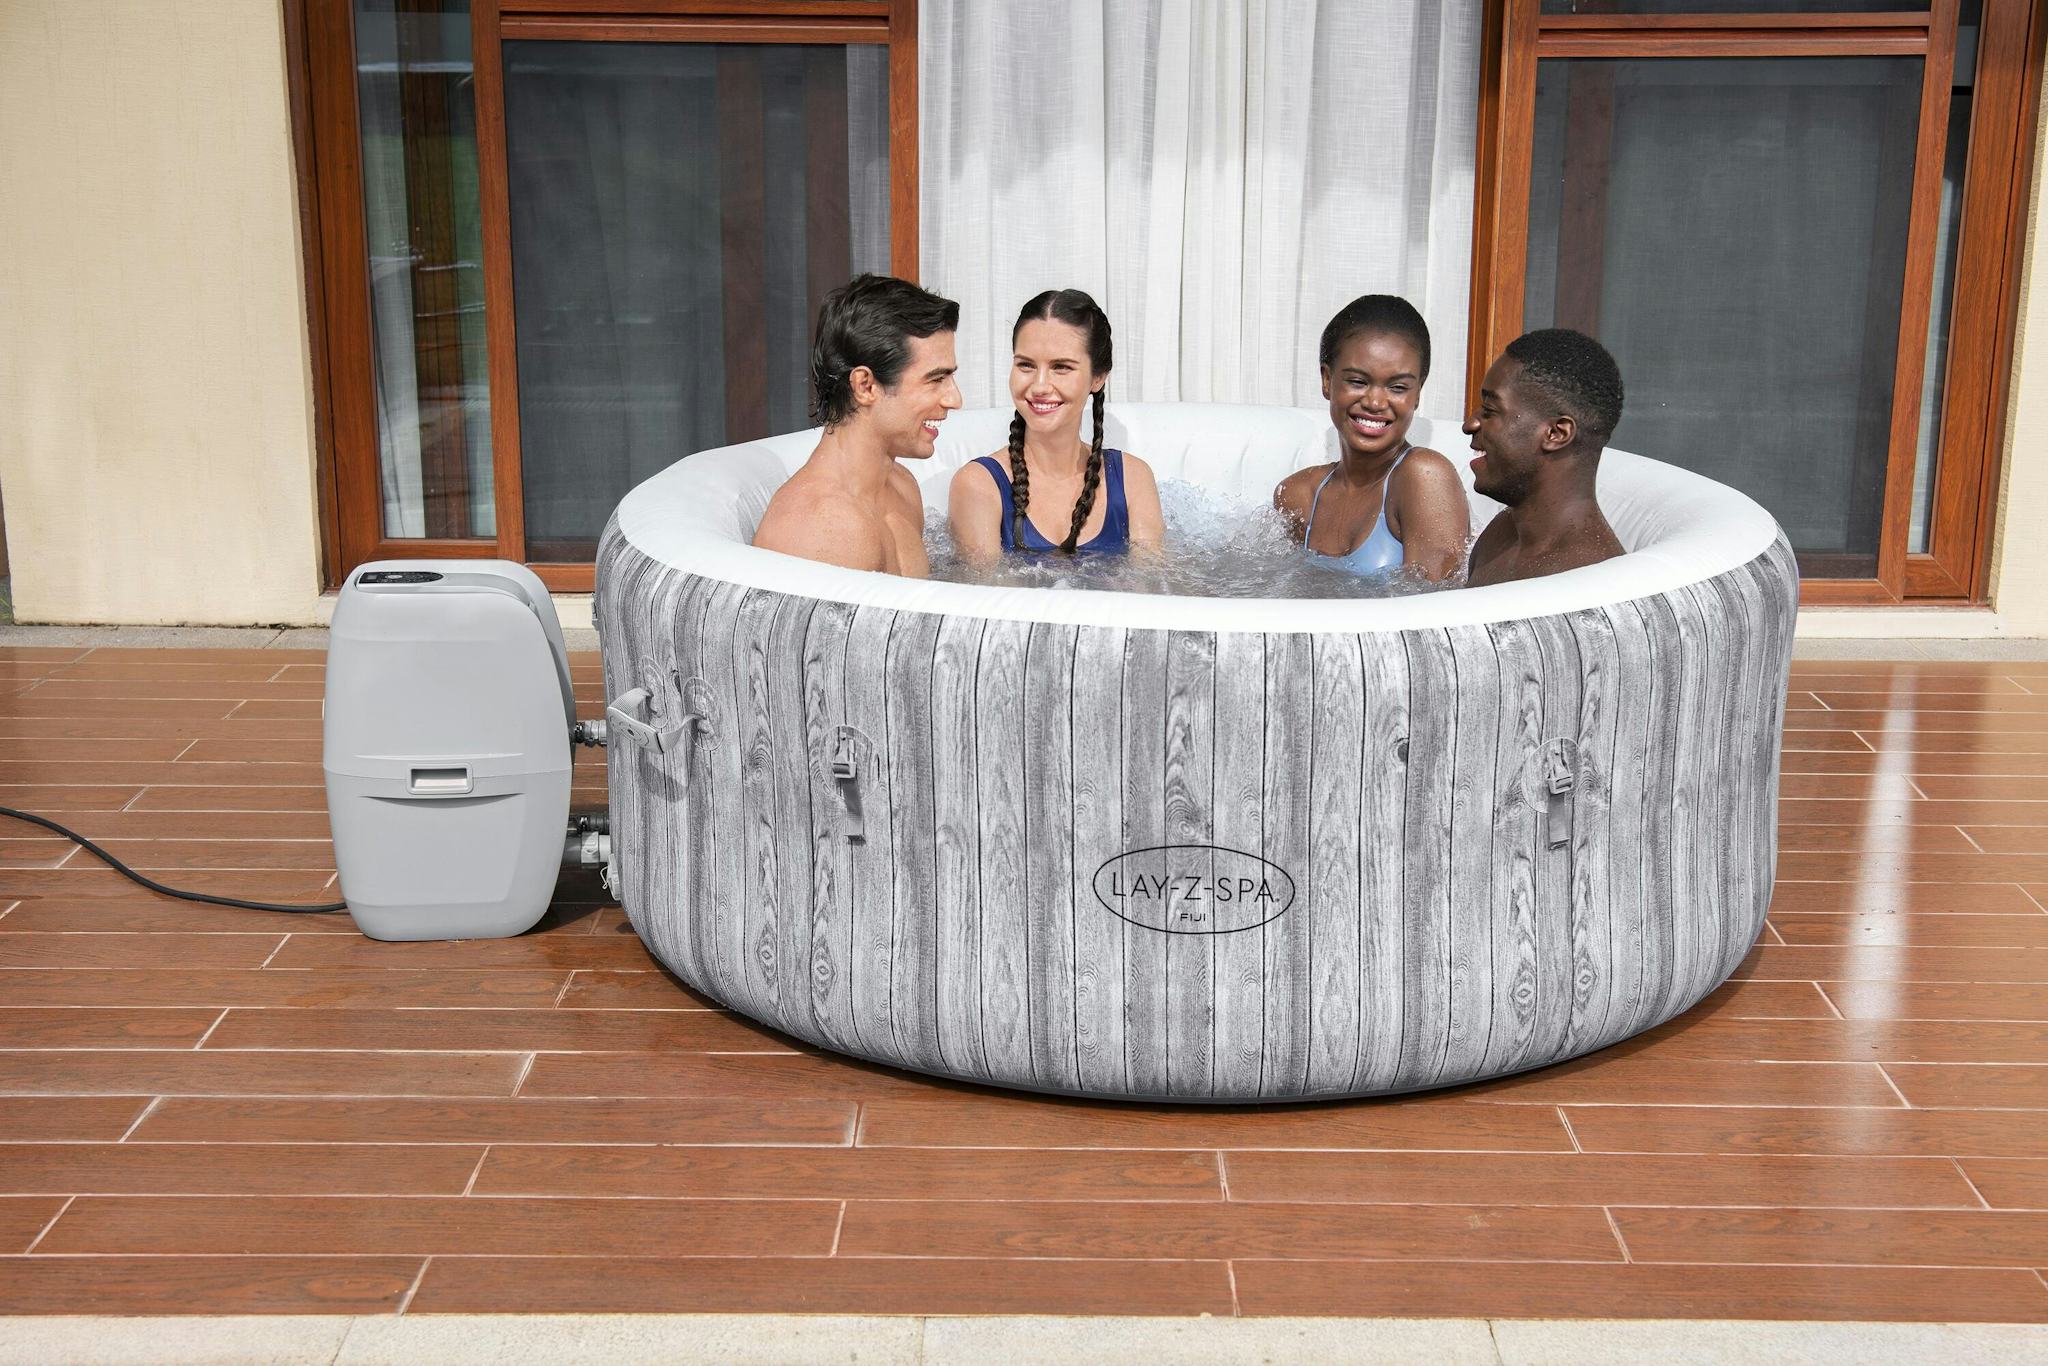 Spas Gonflables Spa gonflable rond Lay-Z-Spa Fiji Airjet™ 2 - 4 personnes Bestway 14